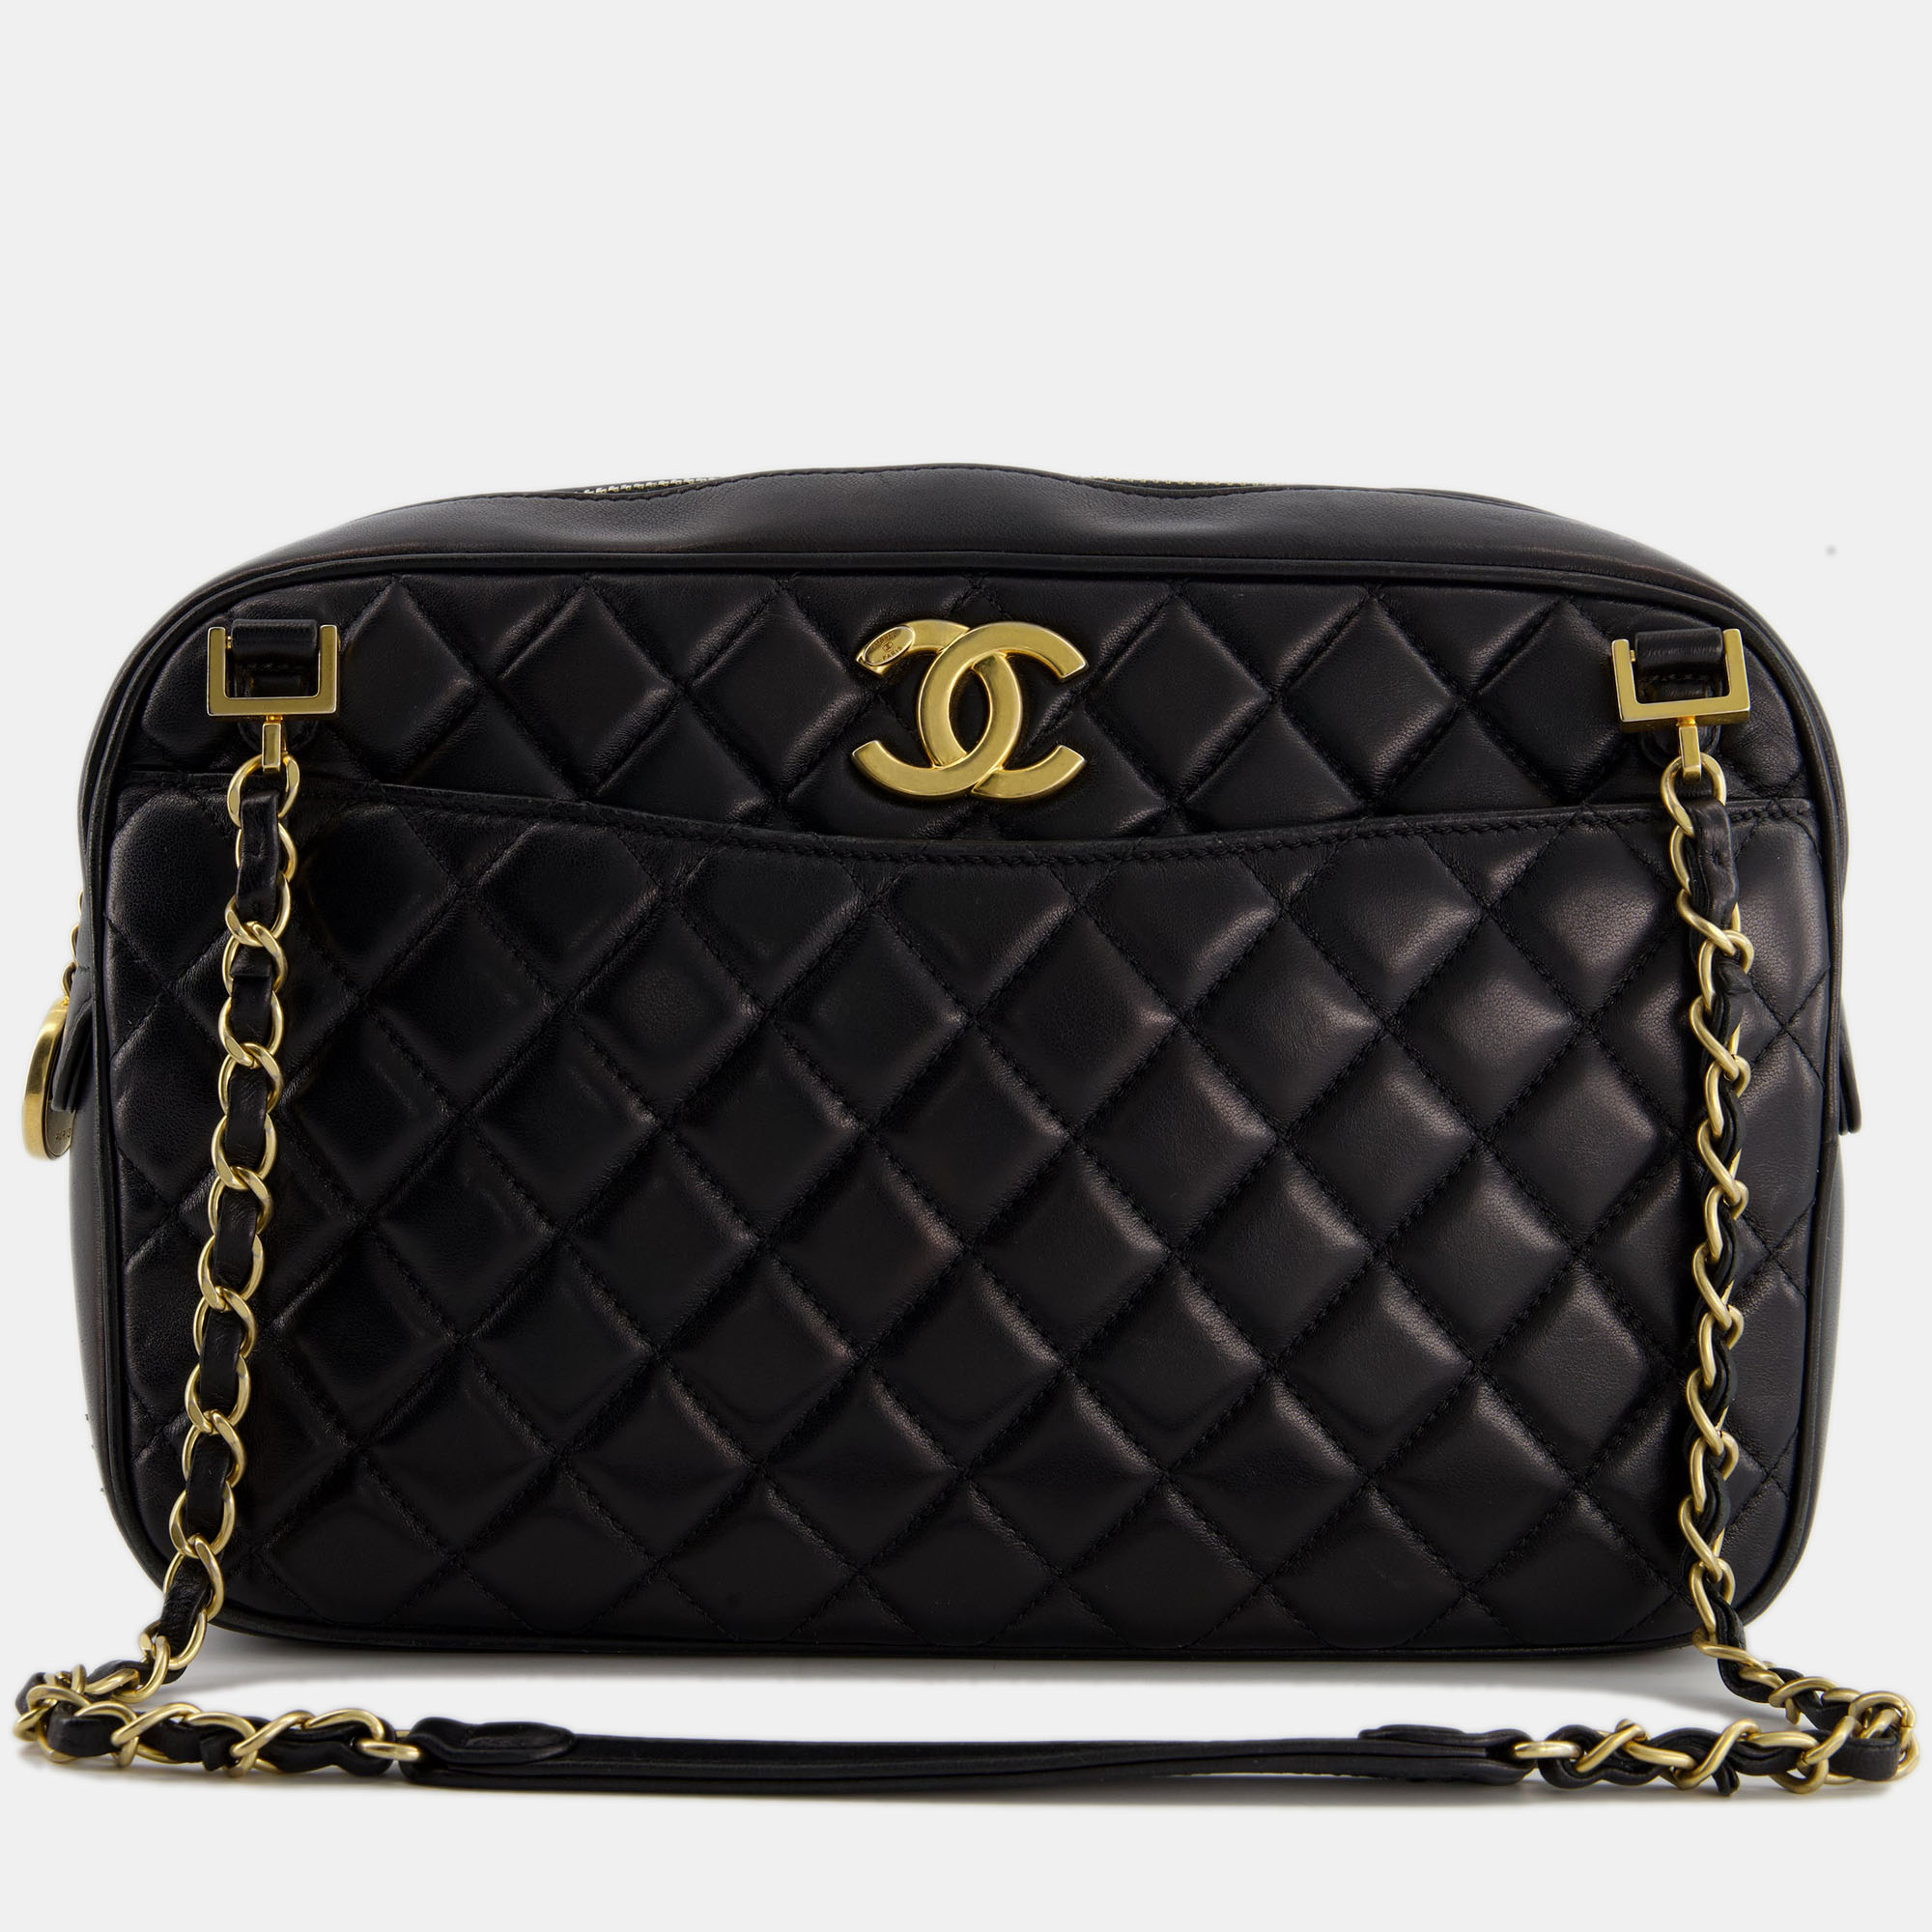 

Chanel Black Crossbody Camera Bag in Quilted Lambskin With Gold Hardware